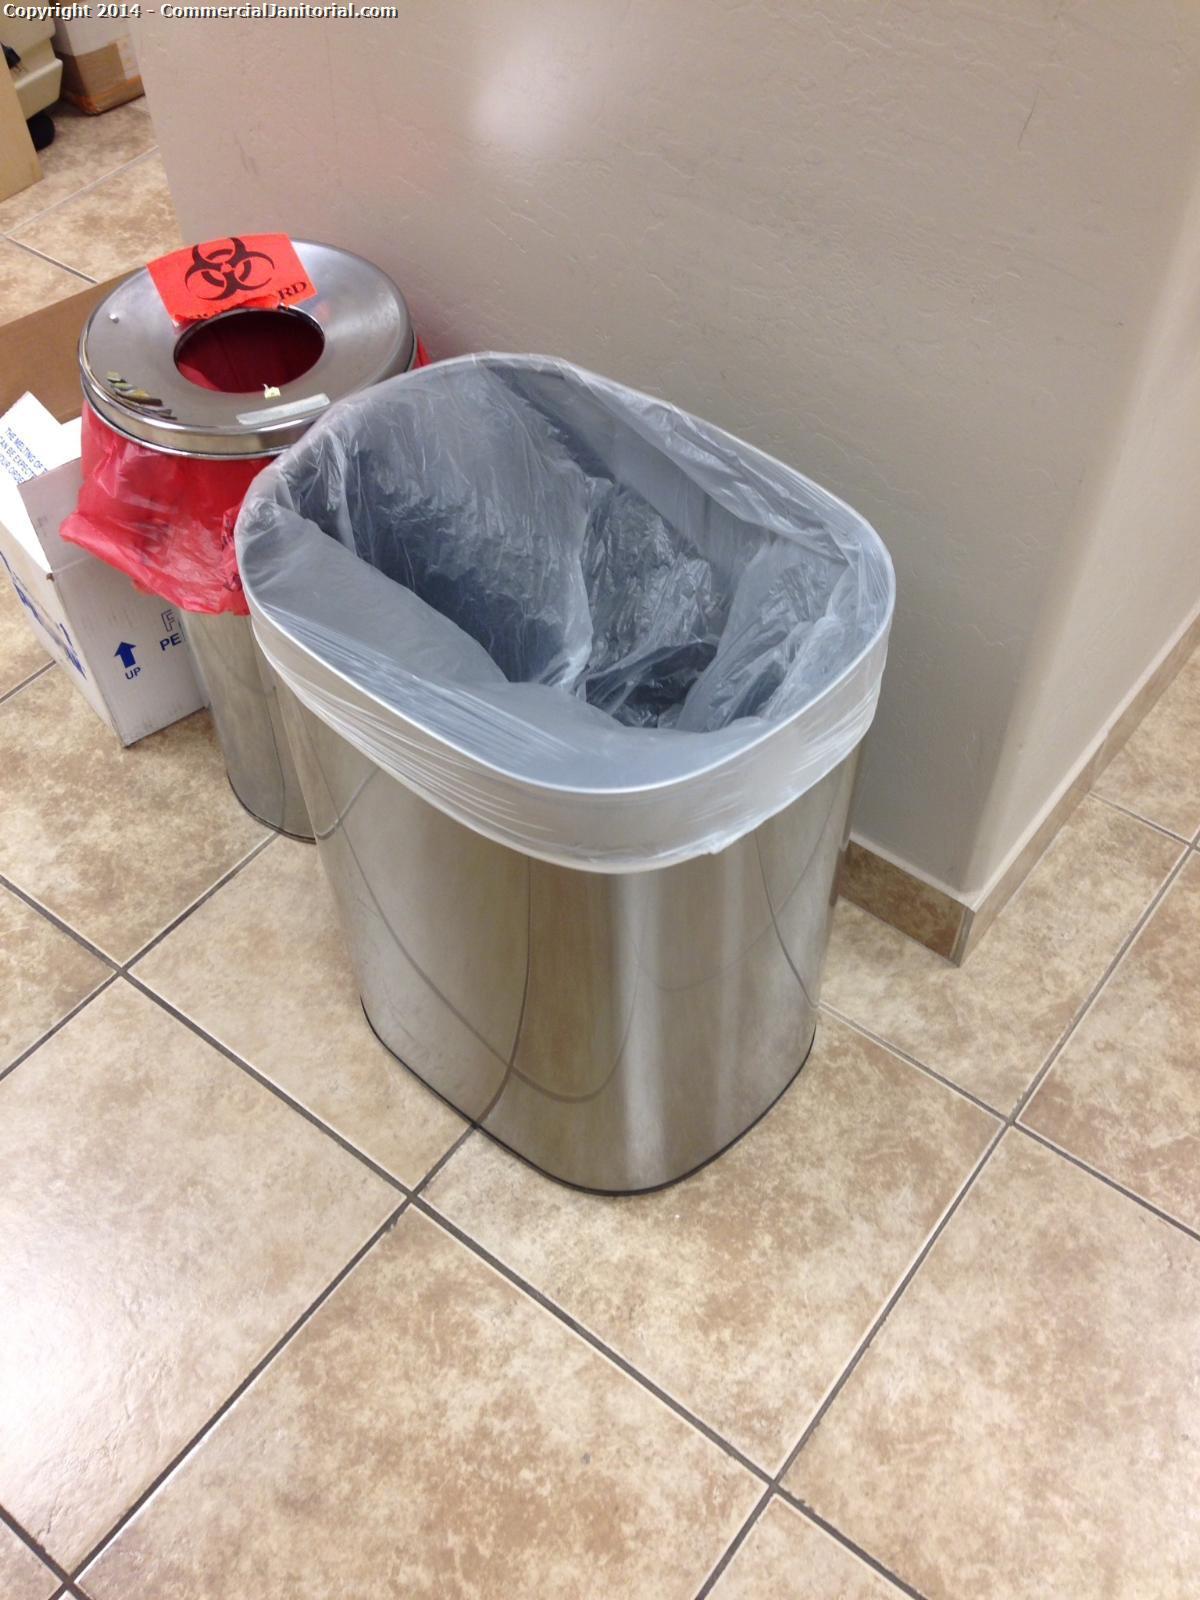 Trash bins have been changed out , and replaced with new trash liners